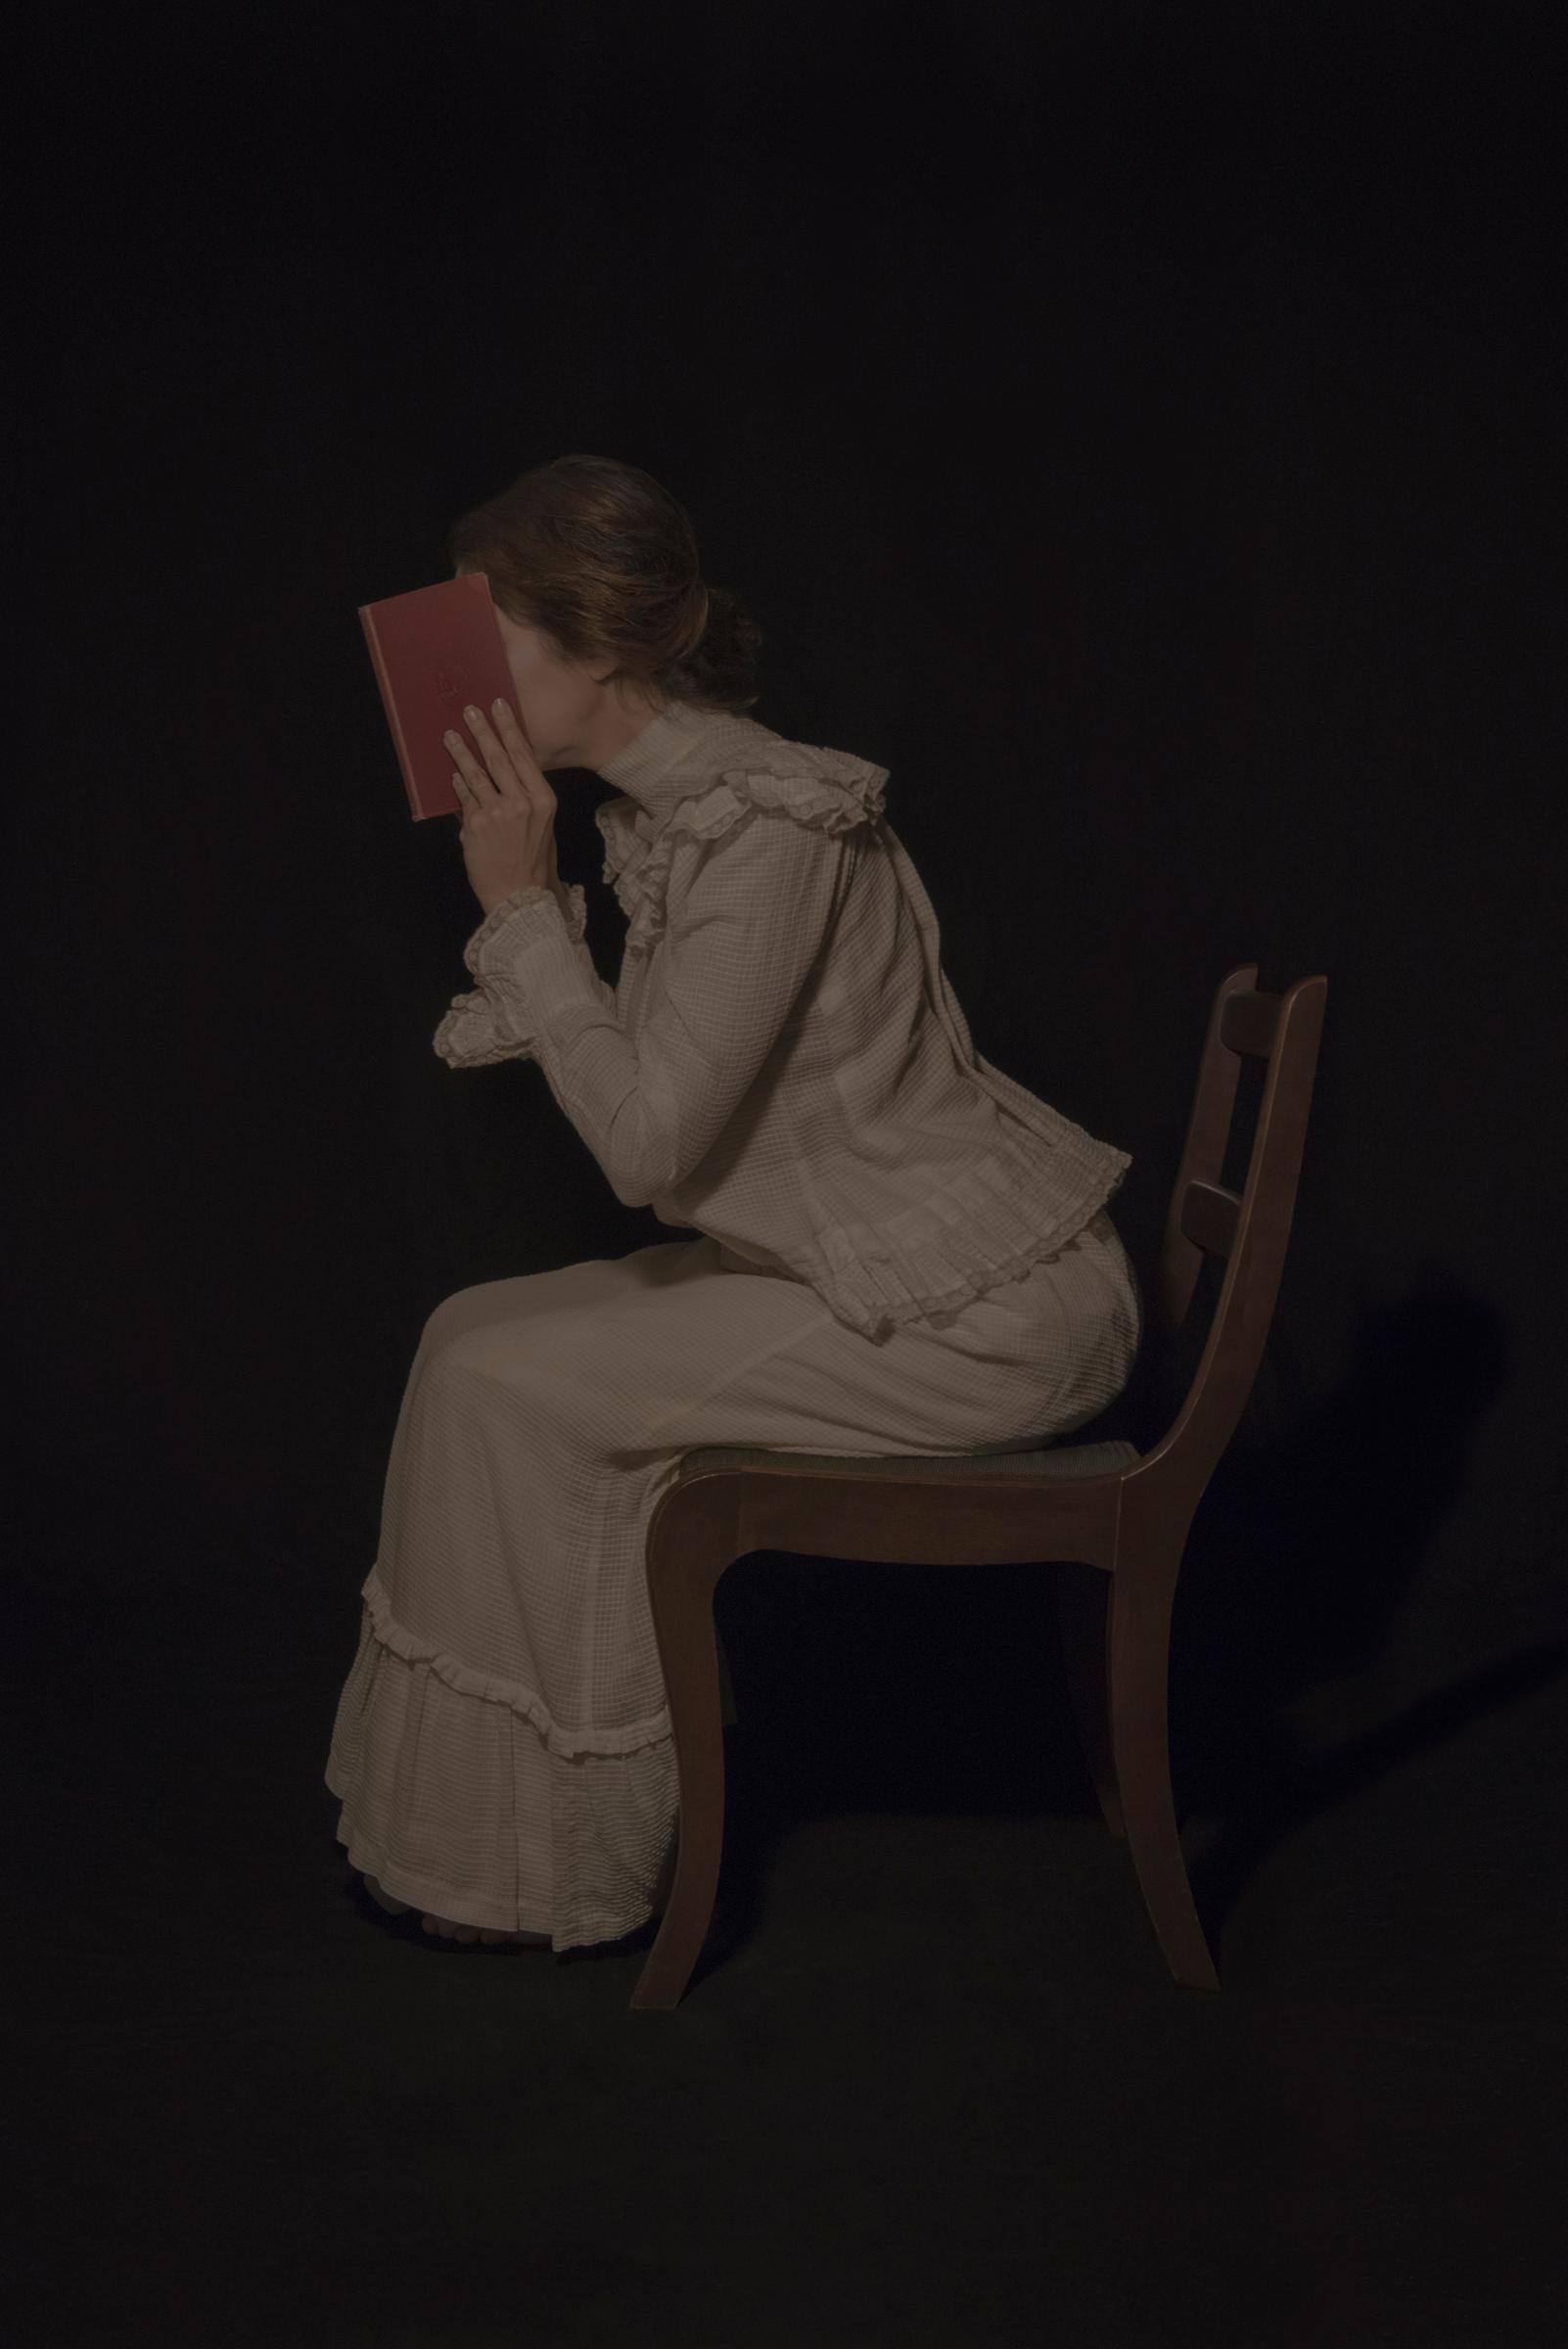 Tami Bahat Figurative Photograph - The Intellectual - Photography of a Girl Reading a book in a Dress, Moody, Dark